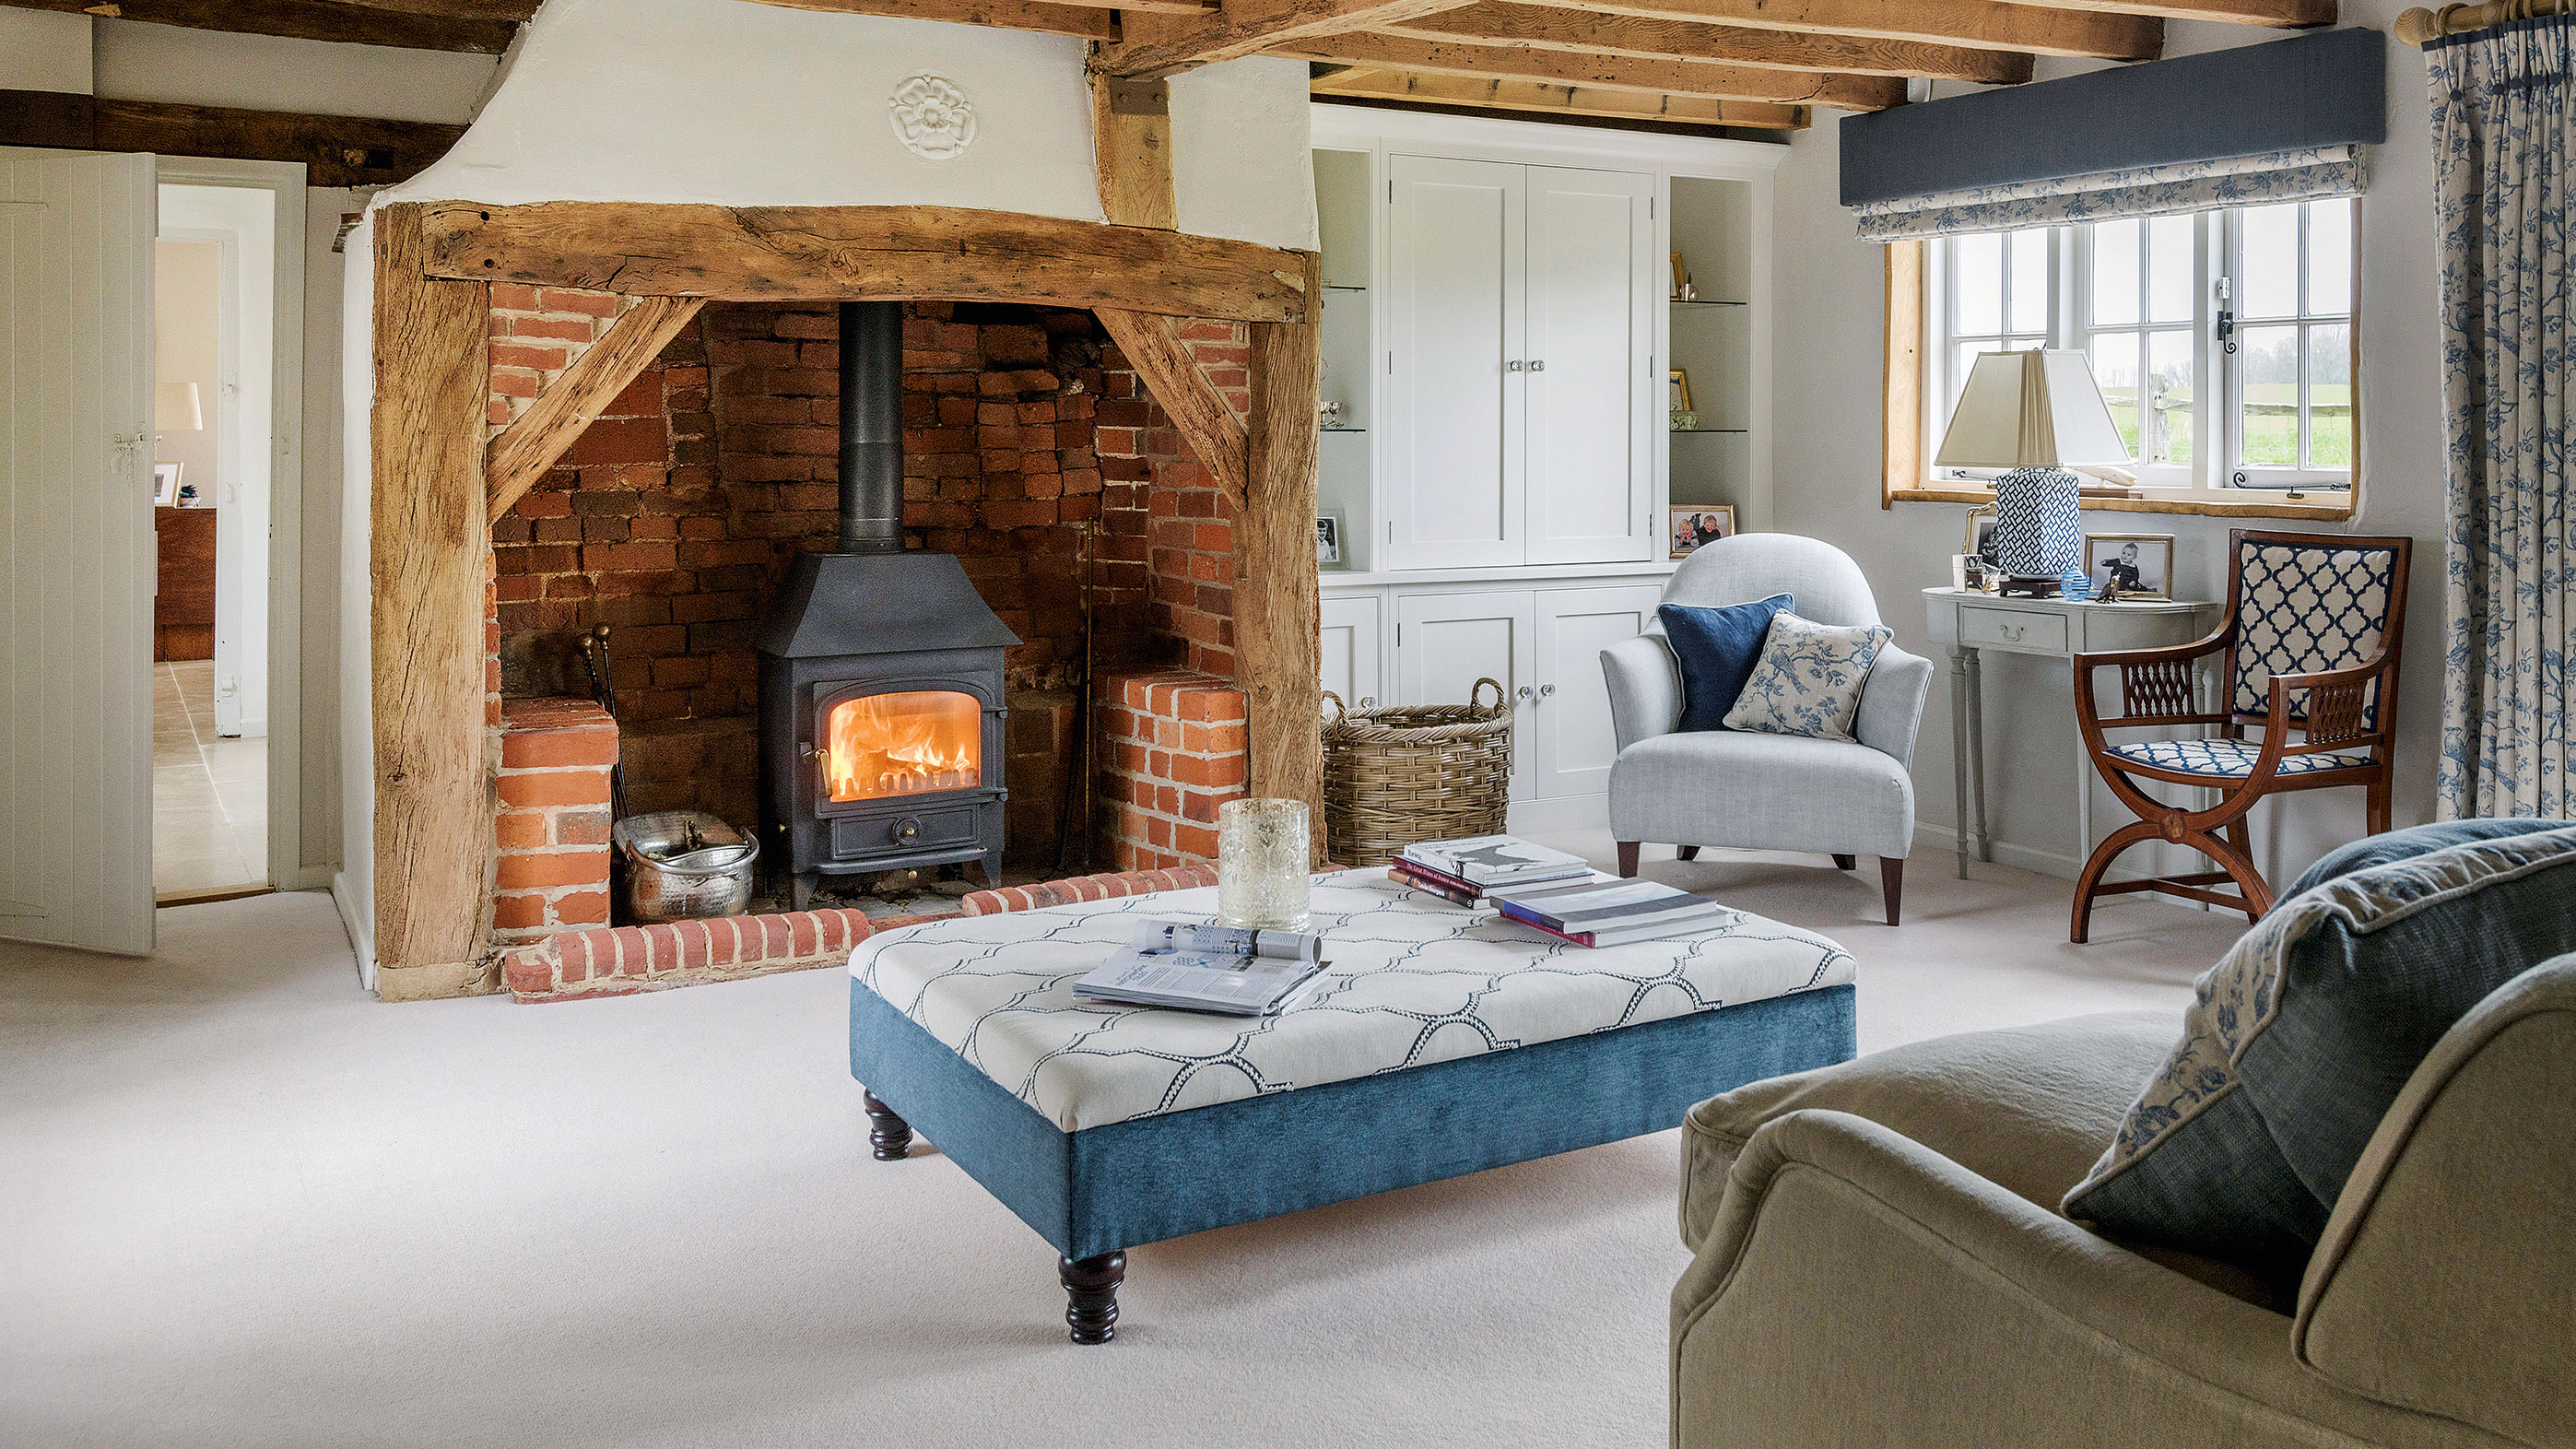 Living room carpet ideas – 10 ways to add warmth and luxury to your floor |  Homes & Gardens |